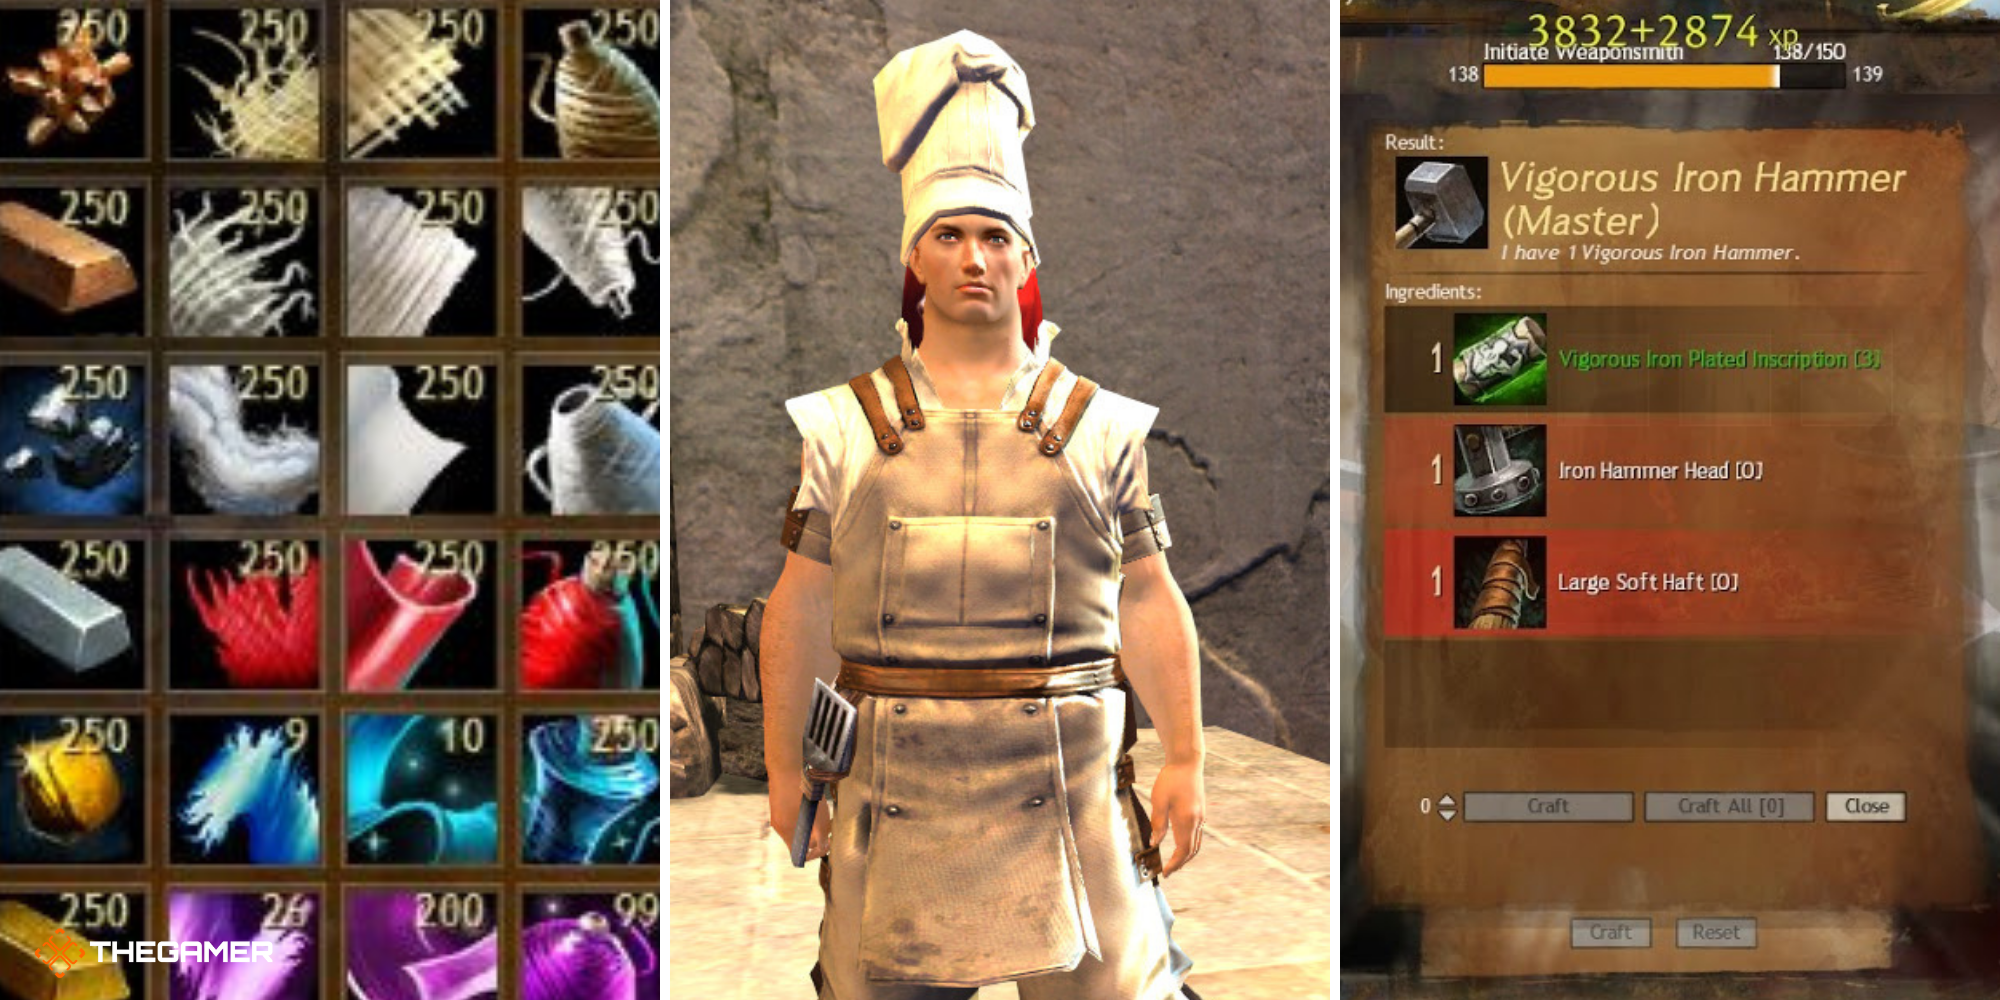 GW2 - Ascended Guide - Guild Wars 2 Equipment and Gear